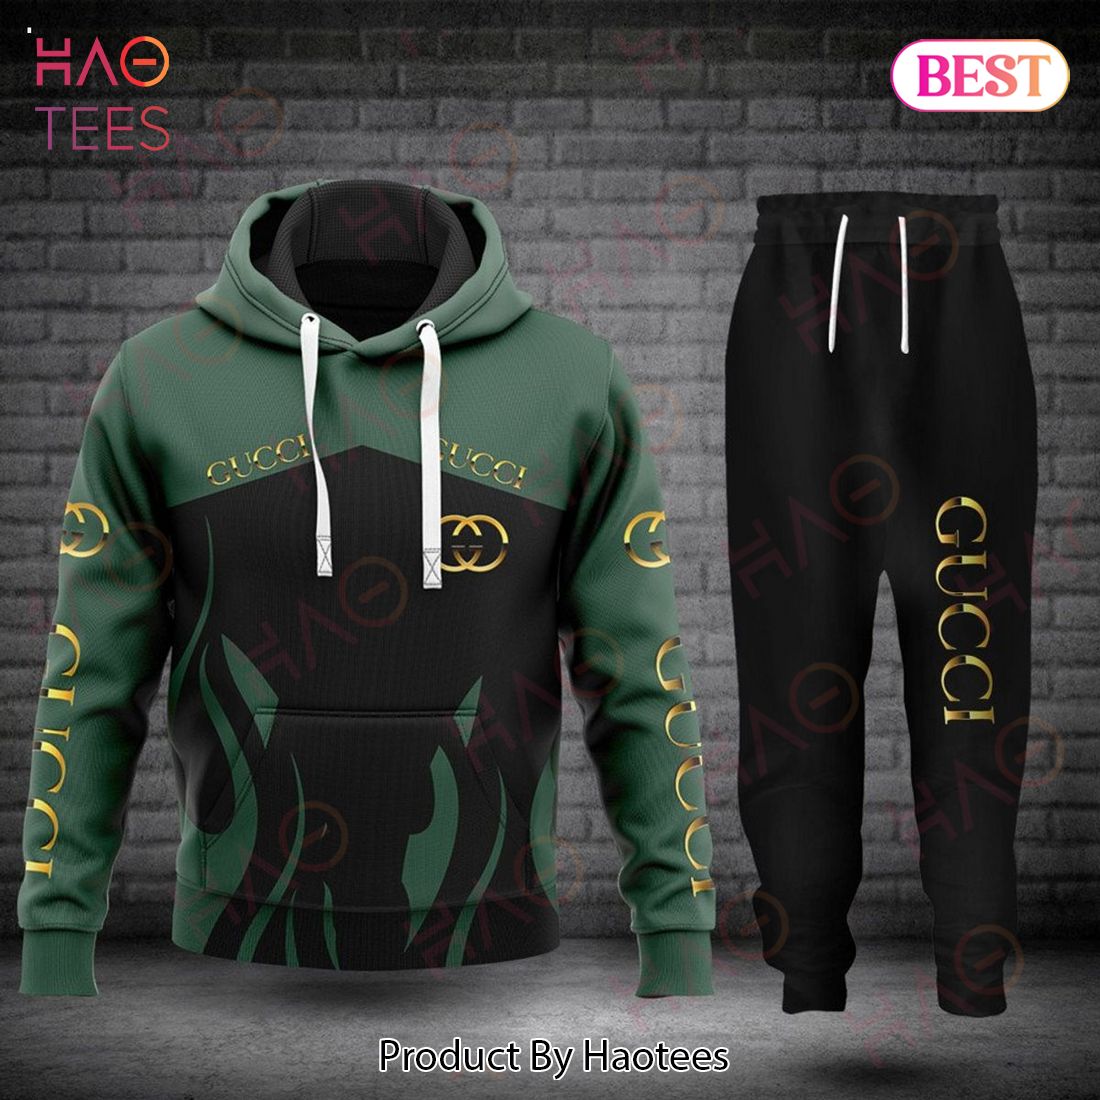 HOT Gucci Black Mix Green Luxury Brand Hoodie And Pants POD Design